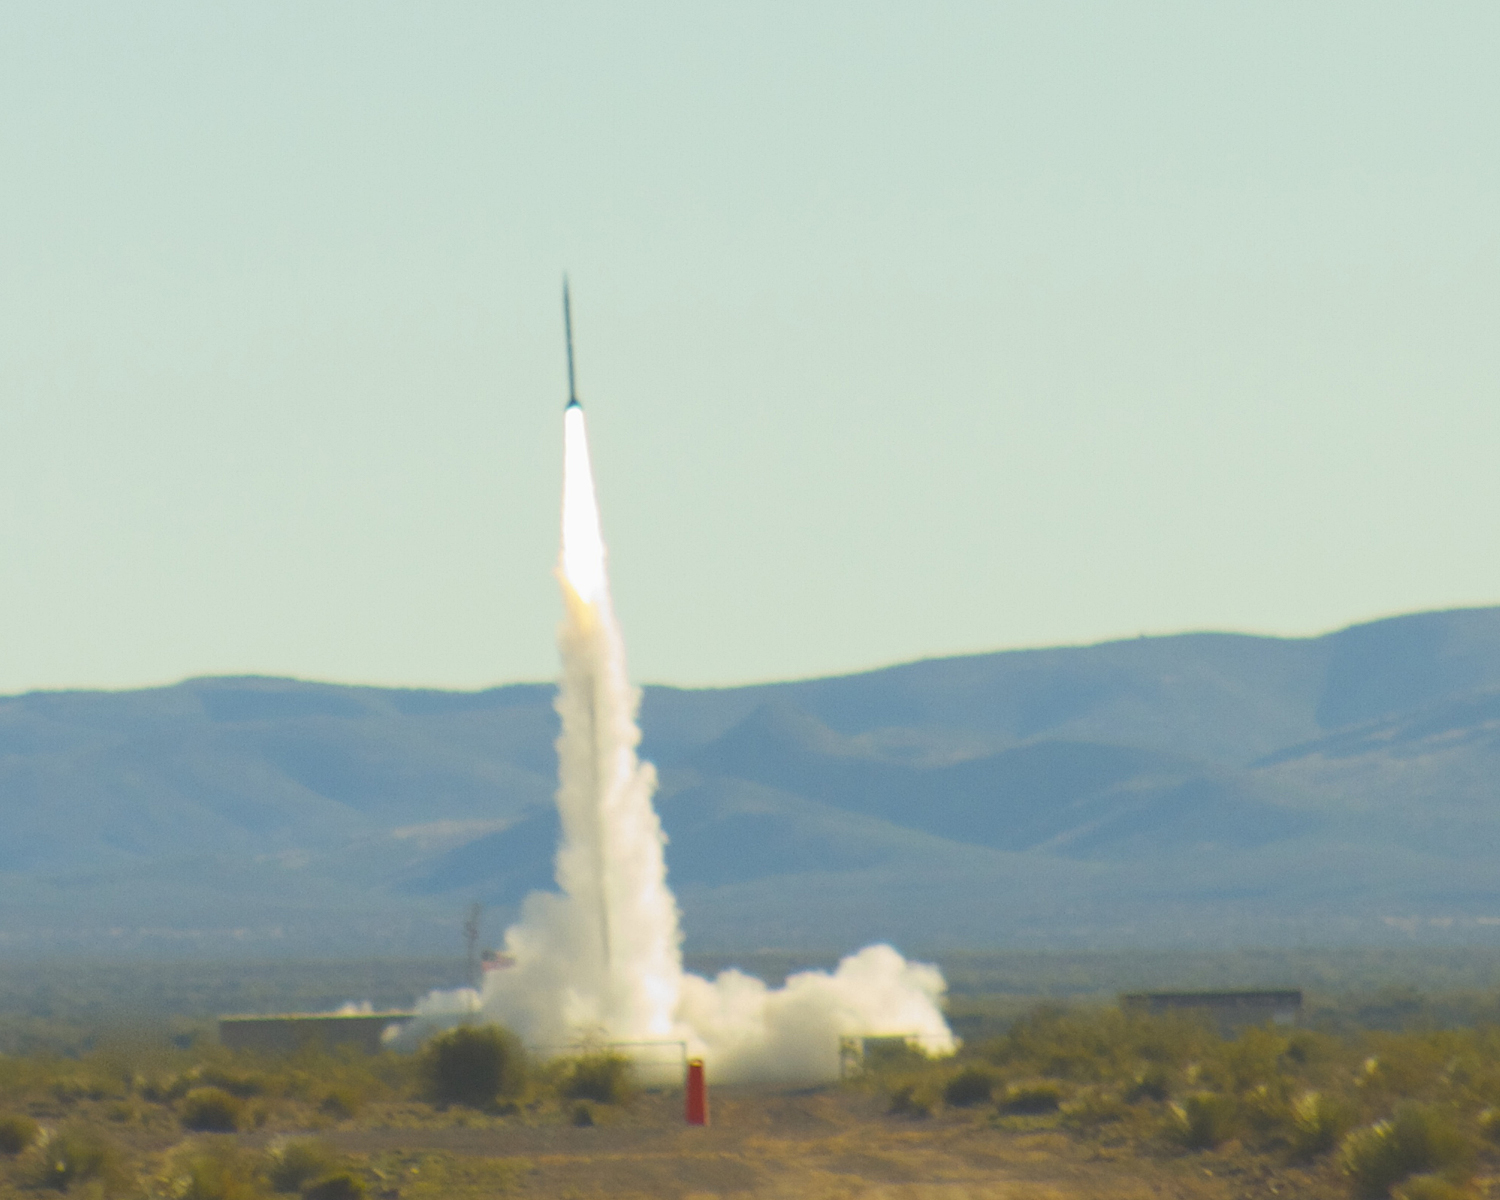 An UP Aerospace rocket launched experiments to flight test for NASA's Flight Opportunities Program from Spaceport America in NM.